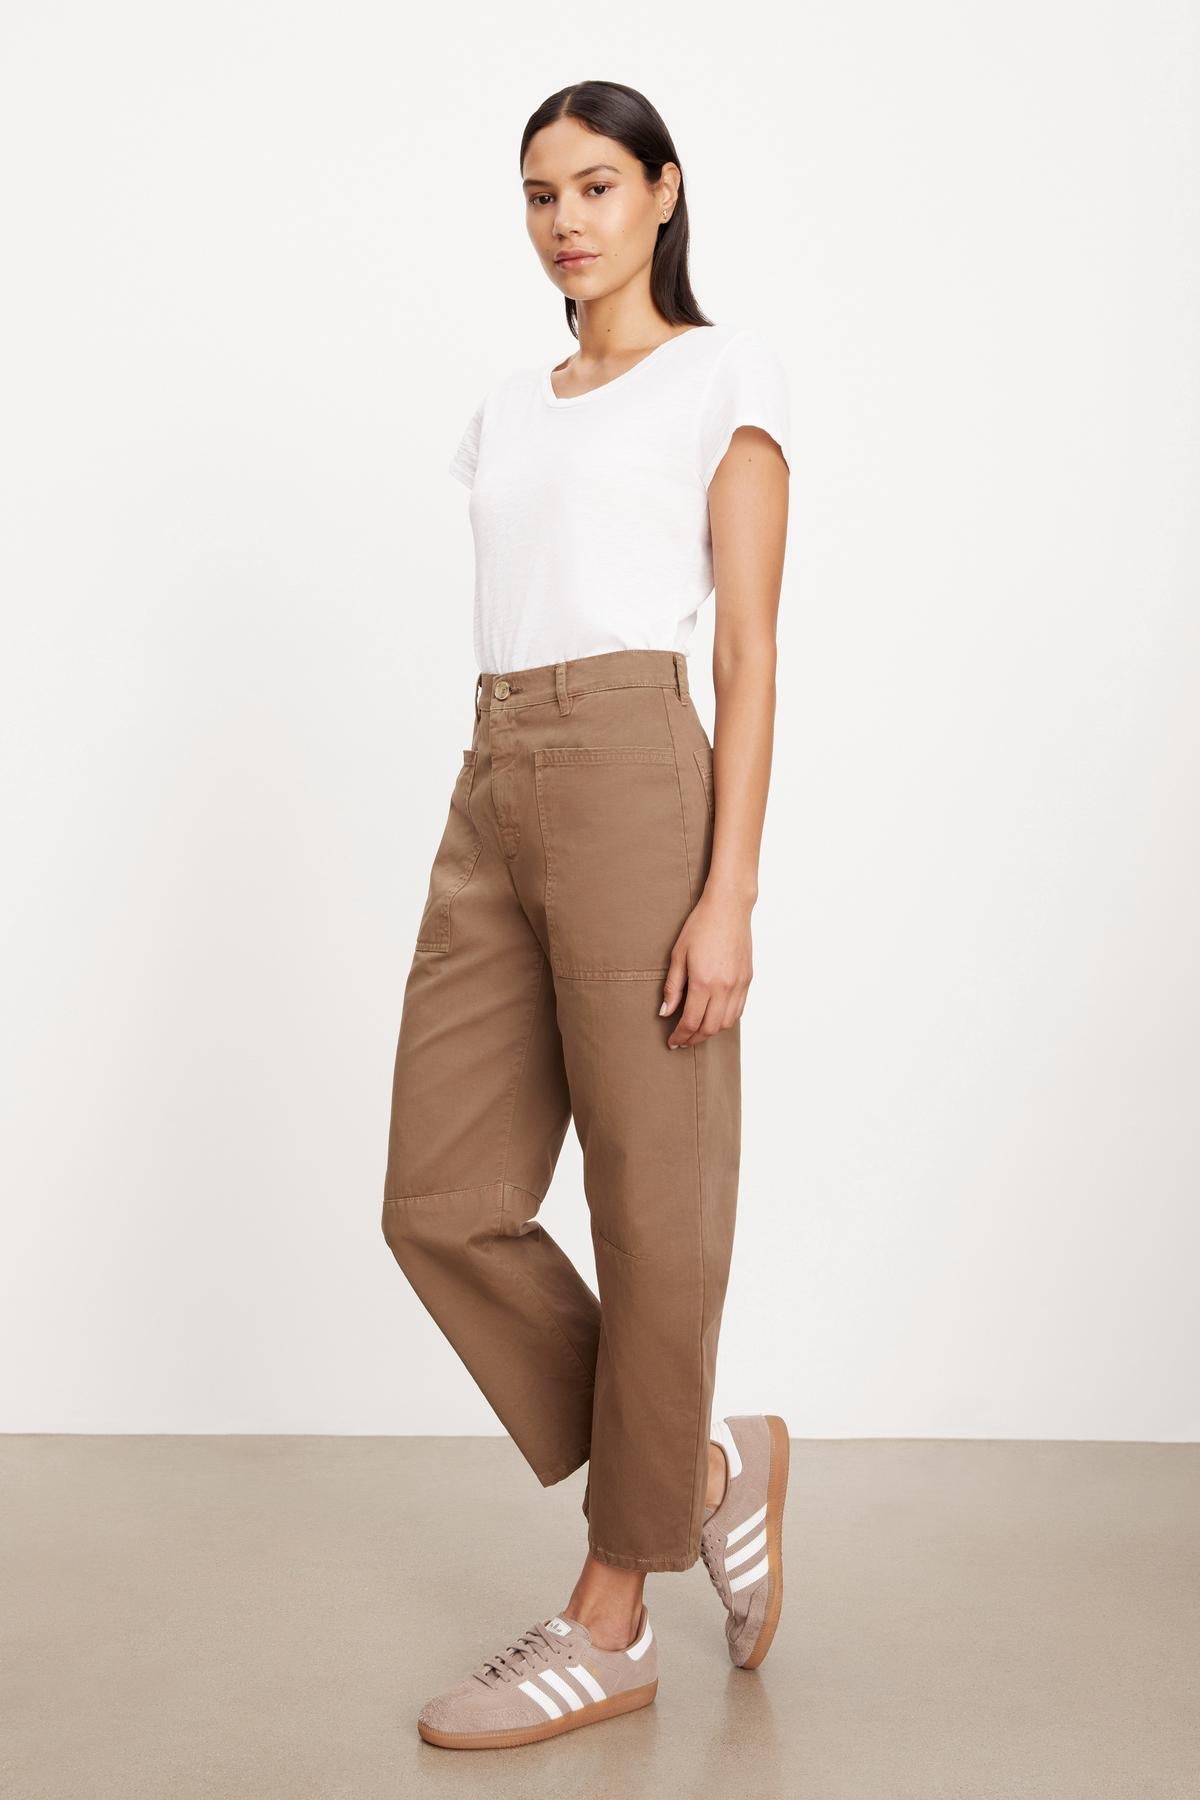 The model is wearing a white t-shirt and Velvet by Graham & Spencer BRYLIE SANDED TWILL UTILITY PANT with patch pockets.-36001385447617